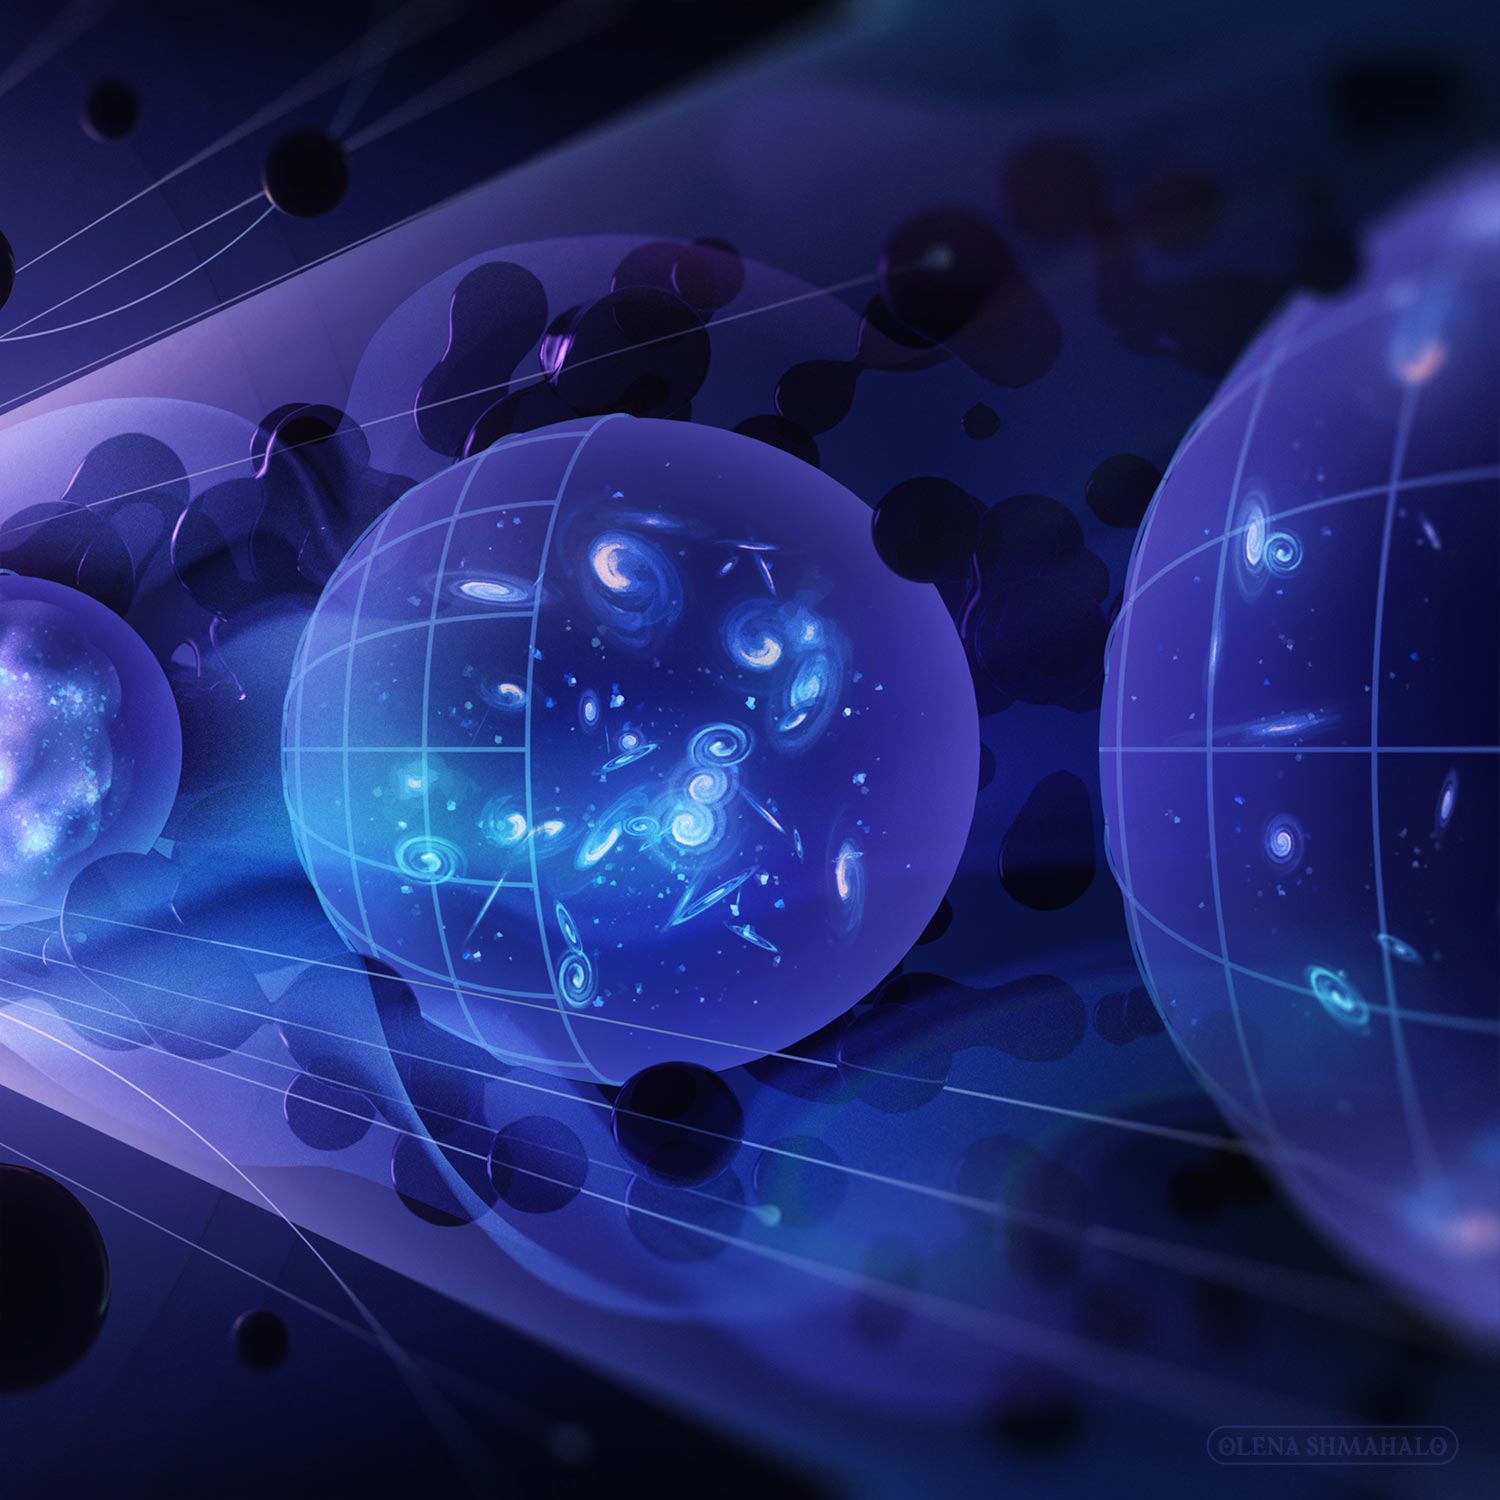 A semi-abstract 3D artwork depicting subatomic and astronomical physics. Crop of the right panel, illustrating the topic *﻿Illuminate the Invisible Universe* from the 2023 P5 report: The evolution of the universe in three stages – 1. primordial cosmic soup / CMB, 2. current distribution of stars and galaxies, 3. further expansion. Dark blobs clustering around the spheres suggest dark matter / primordial black holes. Art by Olena Shmahalo for U.S. Particle Physics.